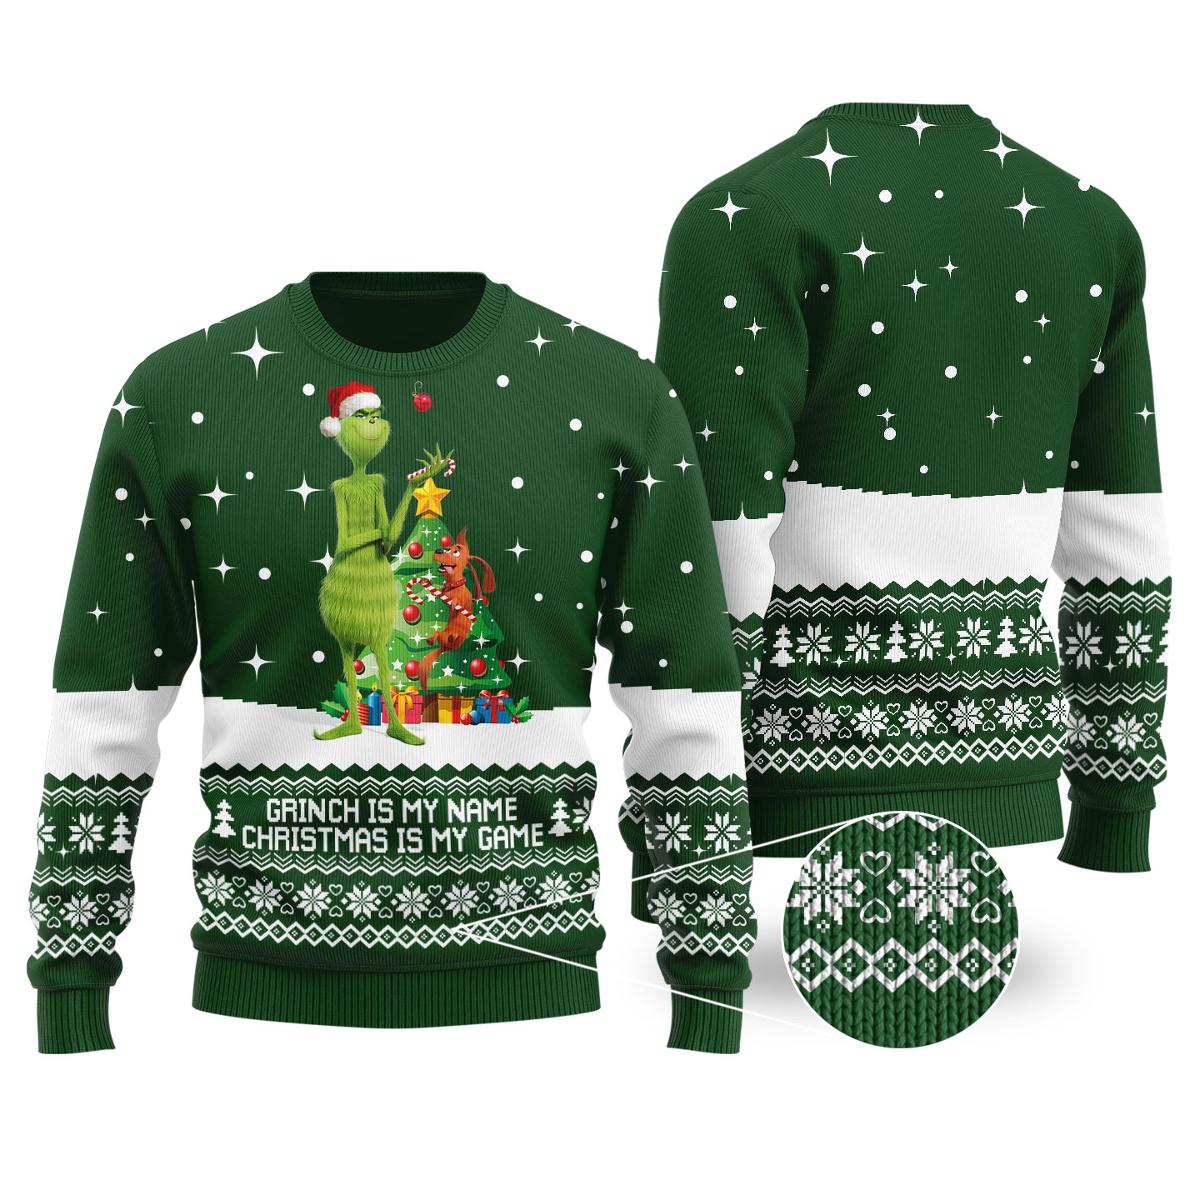 The Grinch Baseball Funny Christmas Sweaters